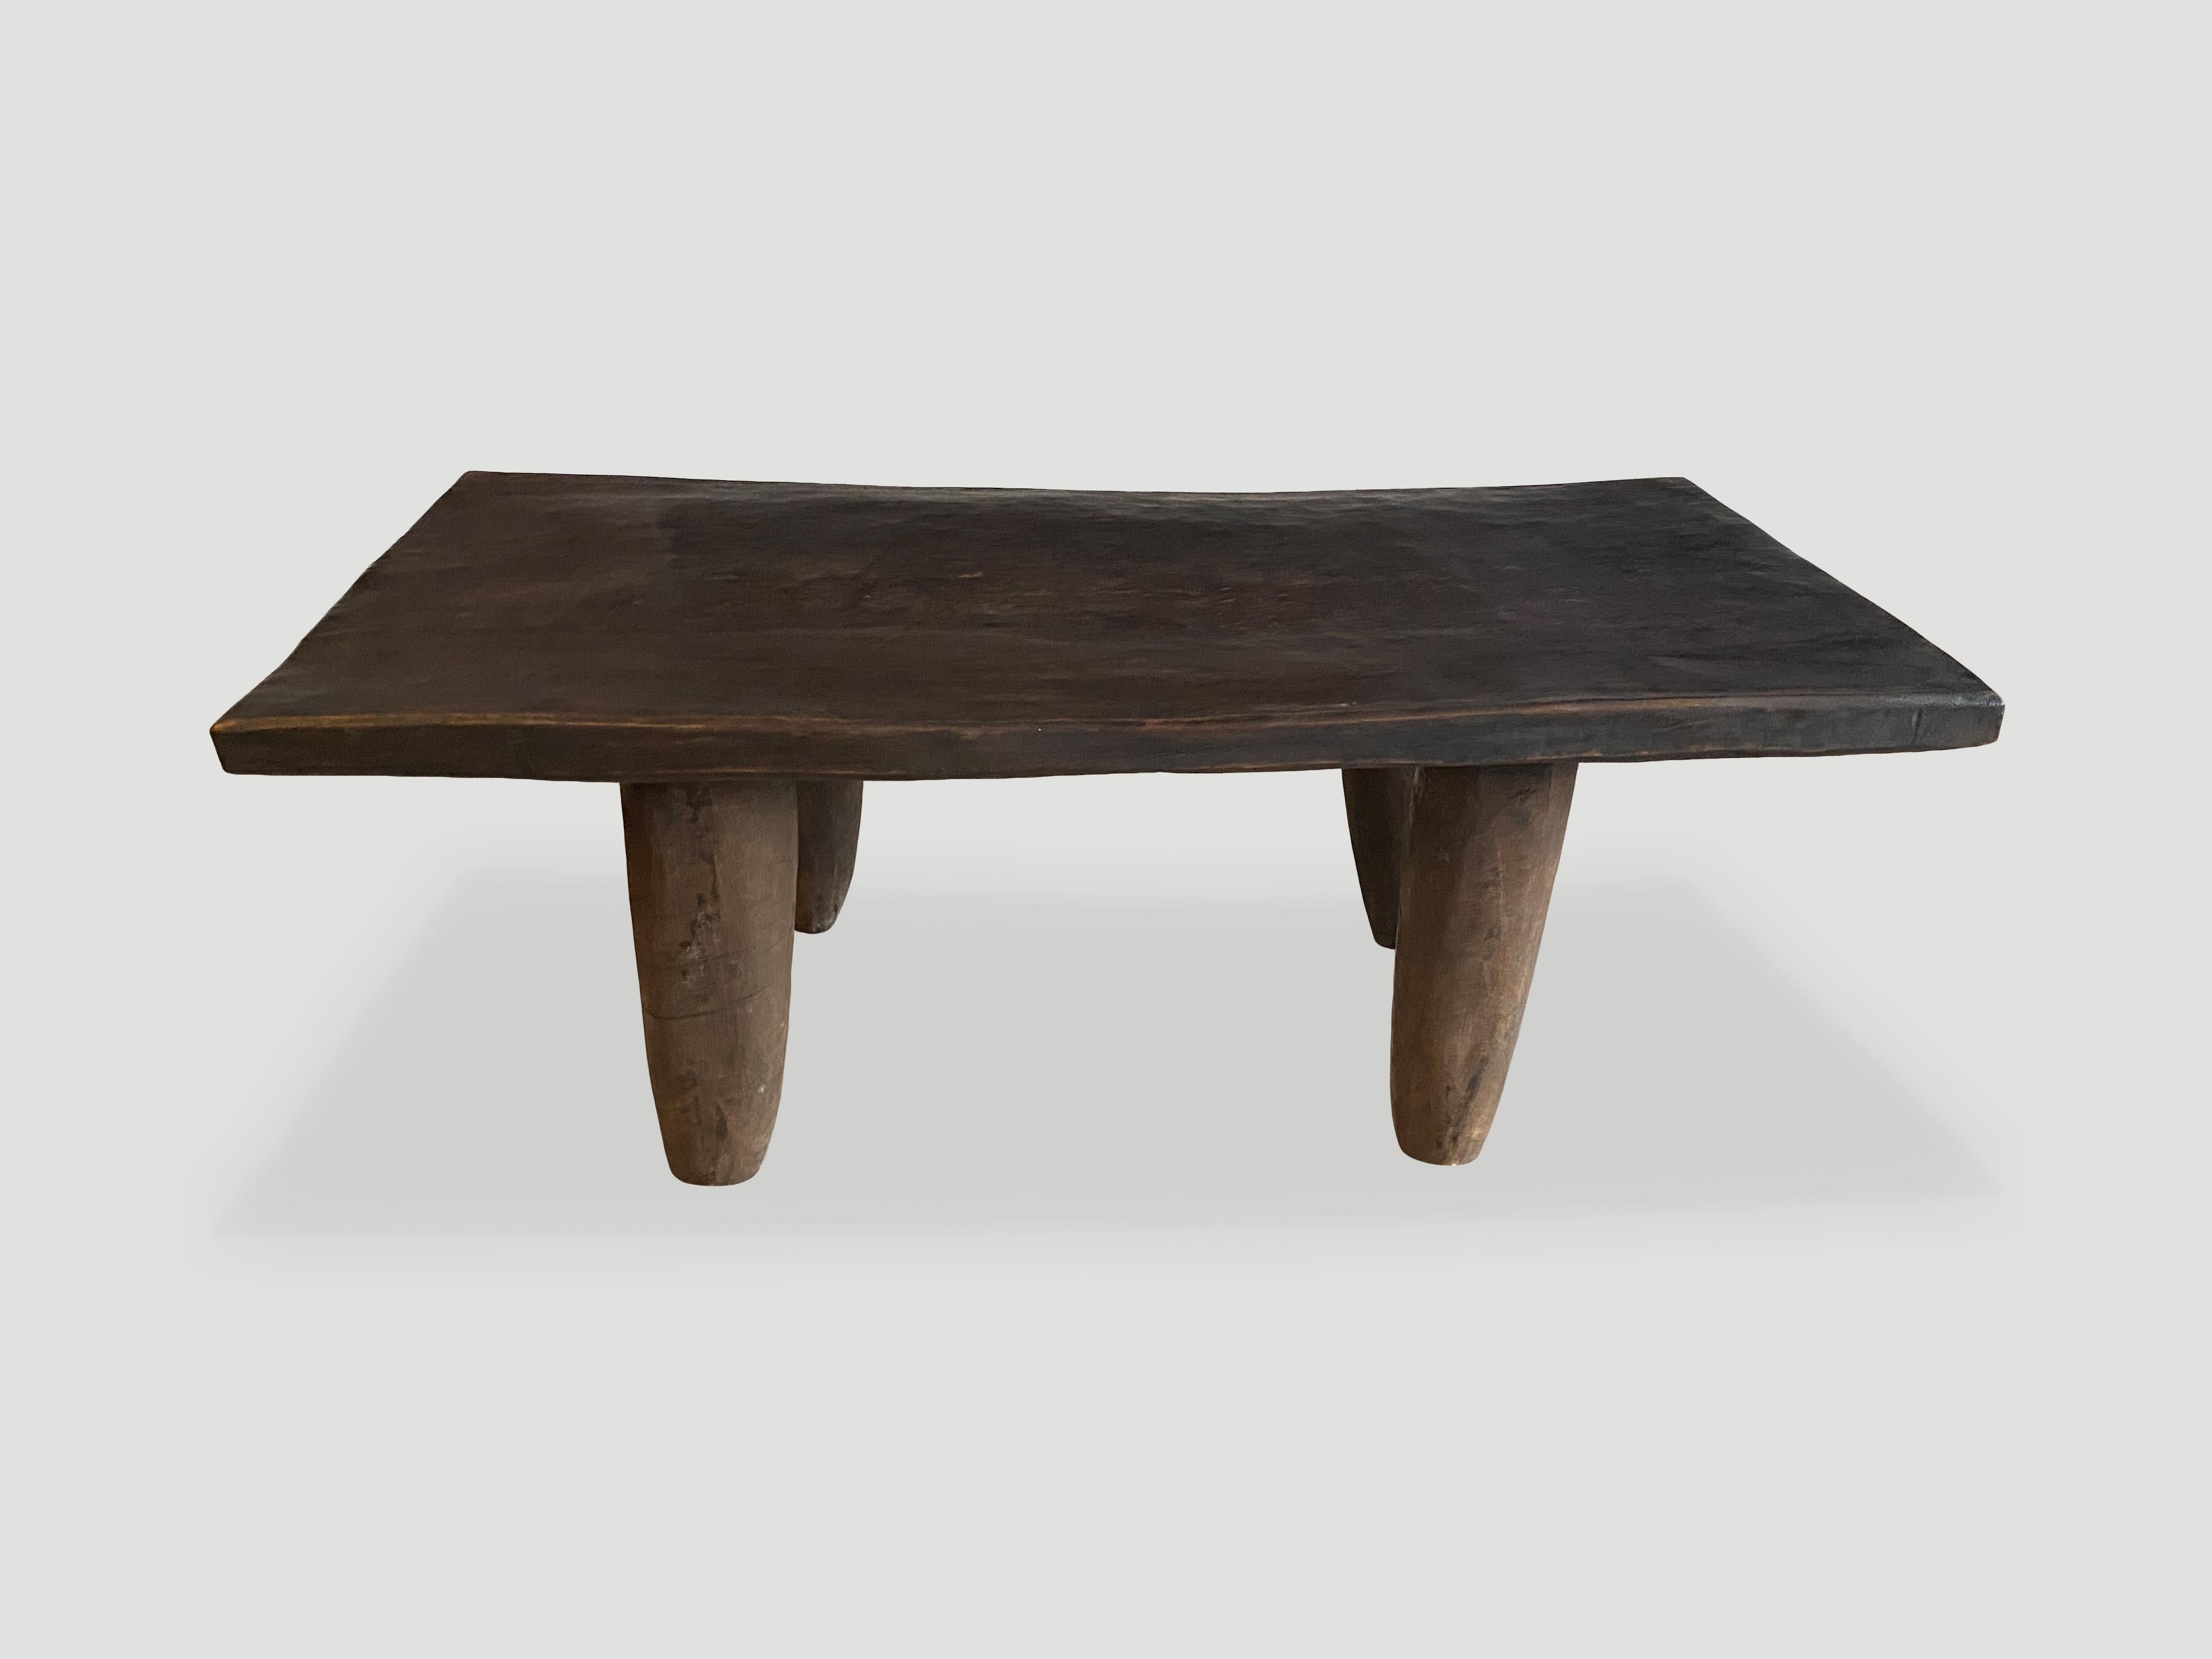 Antique coffee table hand carved by the Senufo tribes from a single block of Iroko wood, native to the west coast of Africa. The wood is tough, dense and very durable. Shown with cone style legs. We only source the best. This one is beautiful, wider